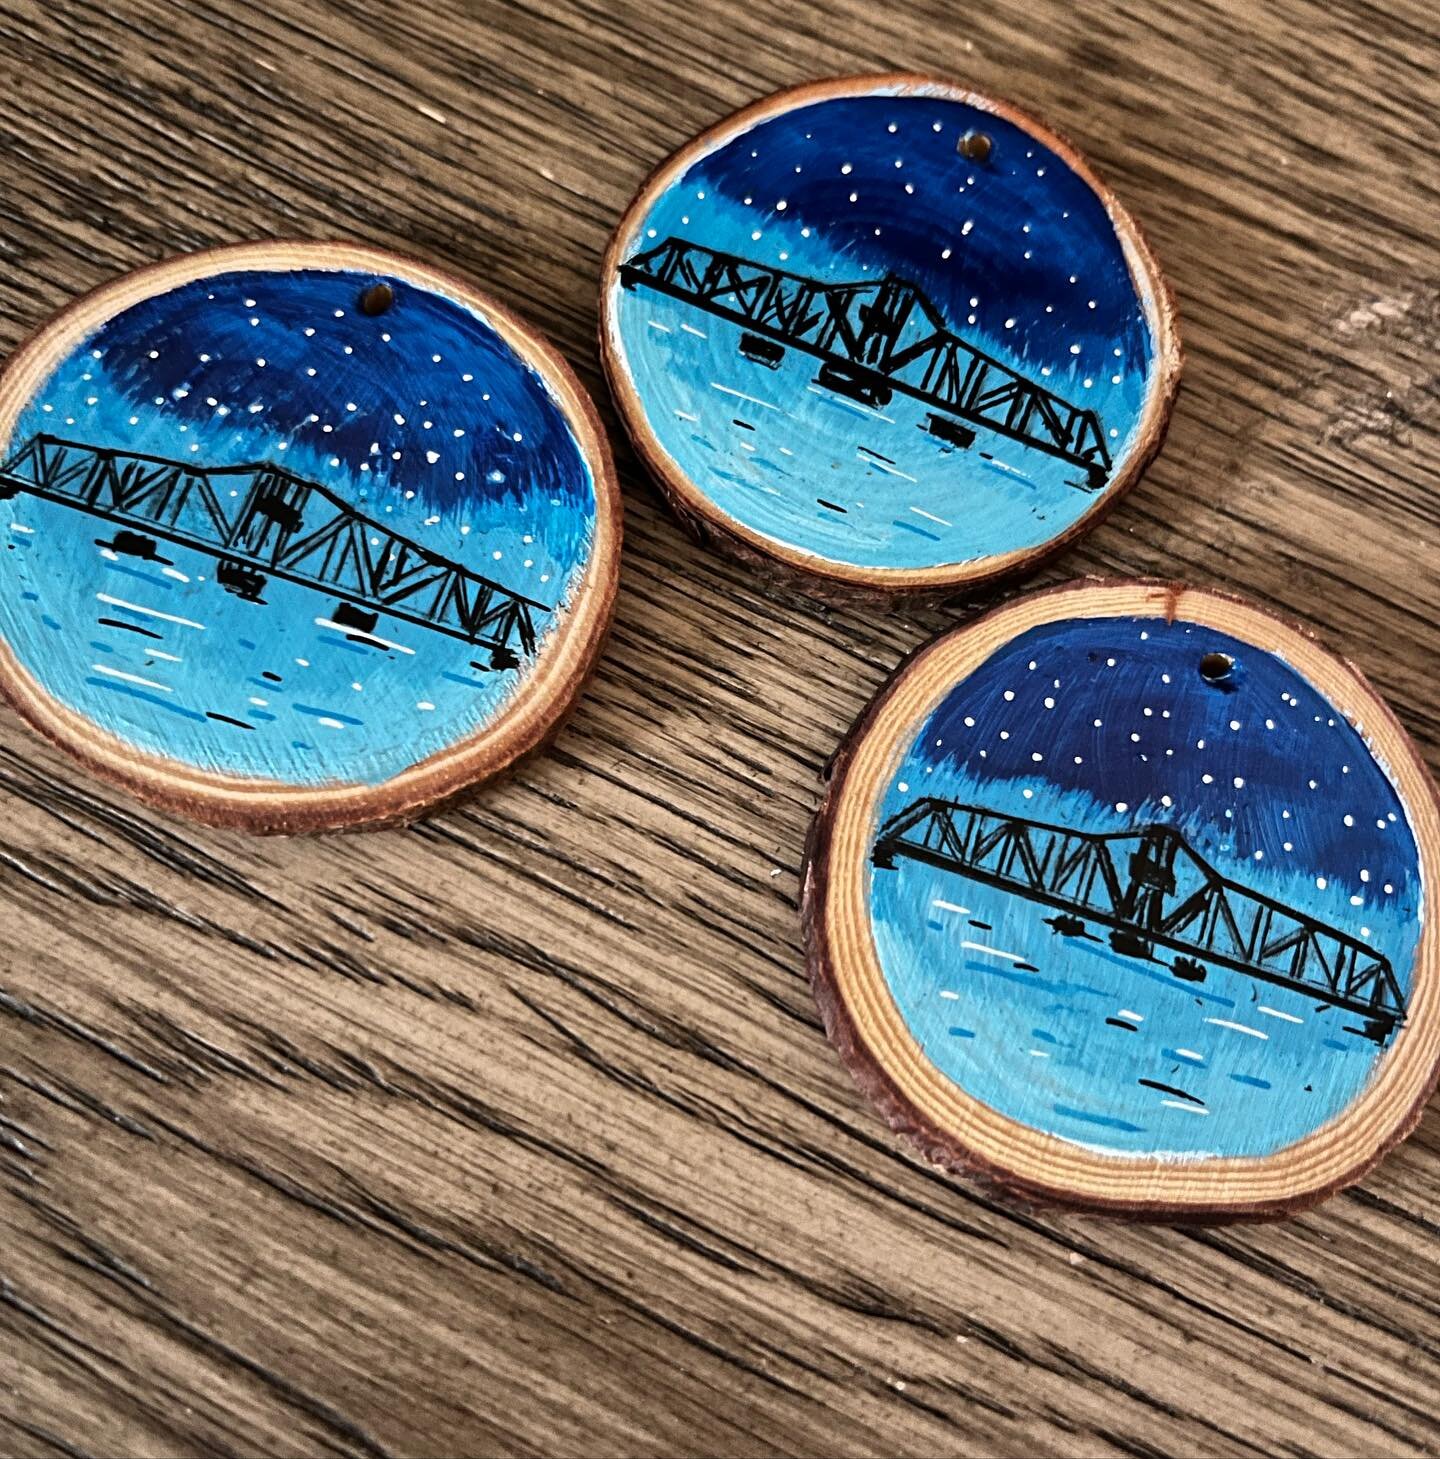 A few more little decorations made by request. I had a request to do an ornament of the bridge so I did but when they came to the market they were sold already! So made a few more. Dropped off one, 2 more available if anyone wants to purchase one, th